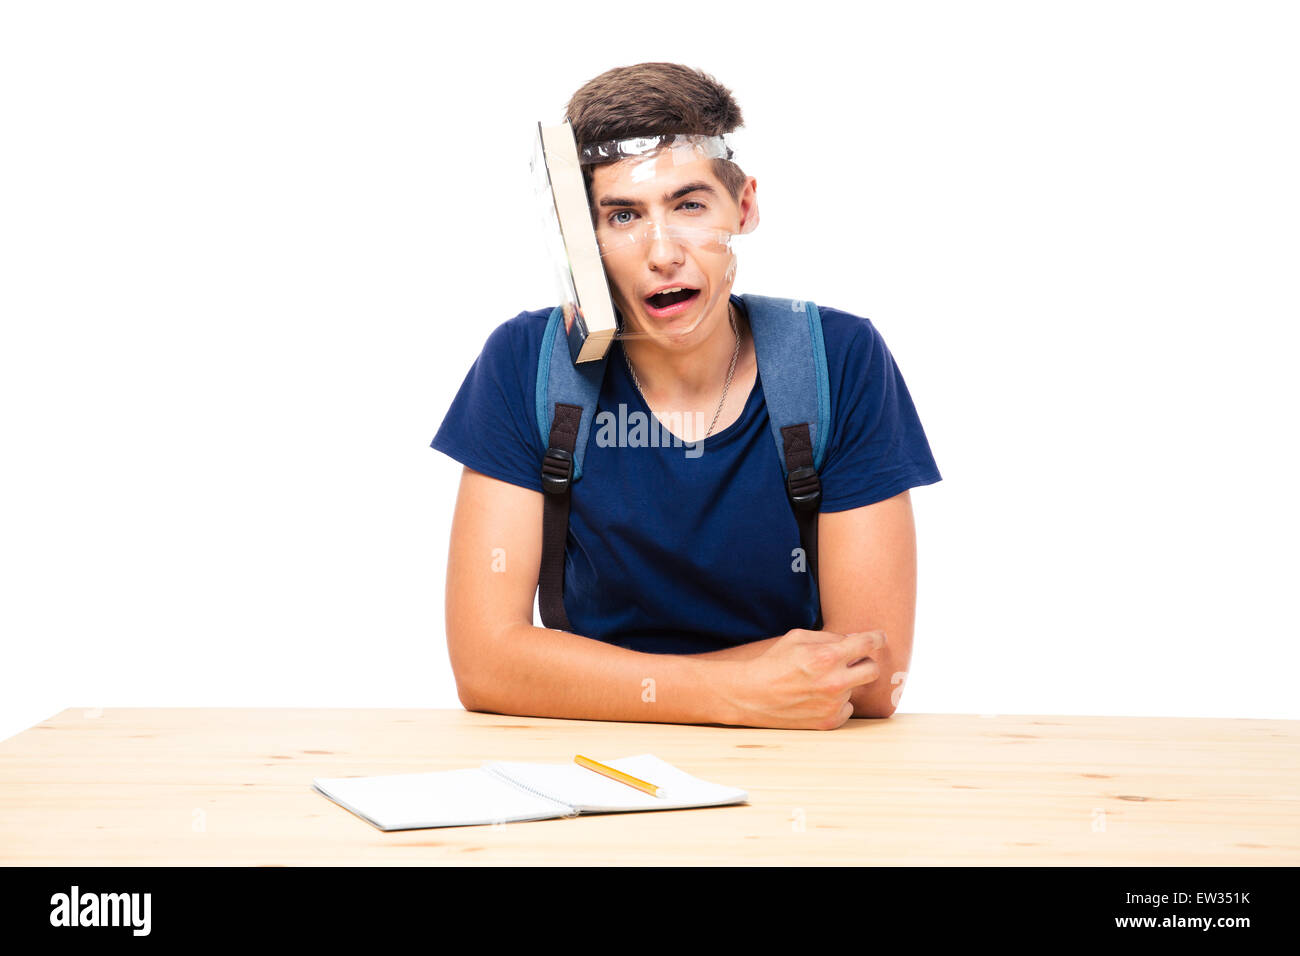 Male student with book strapped to his head sitting at the table isolated on a white background Stock Photo